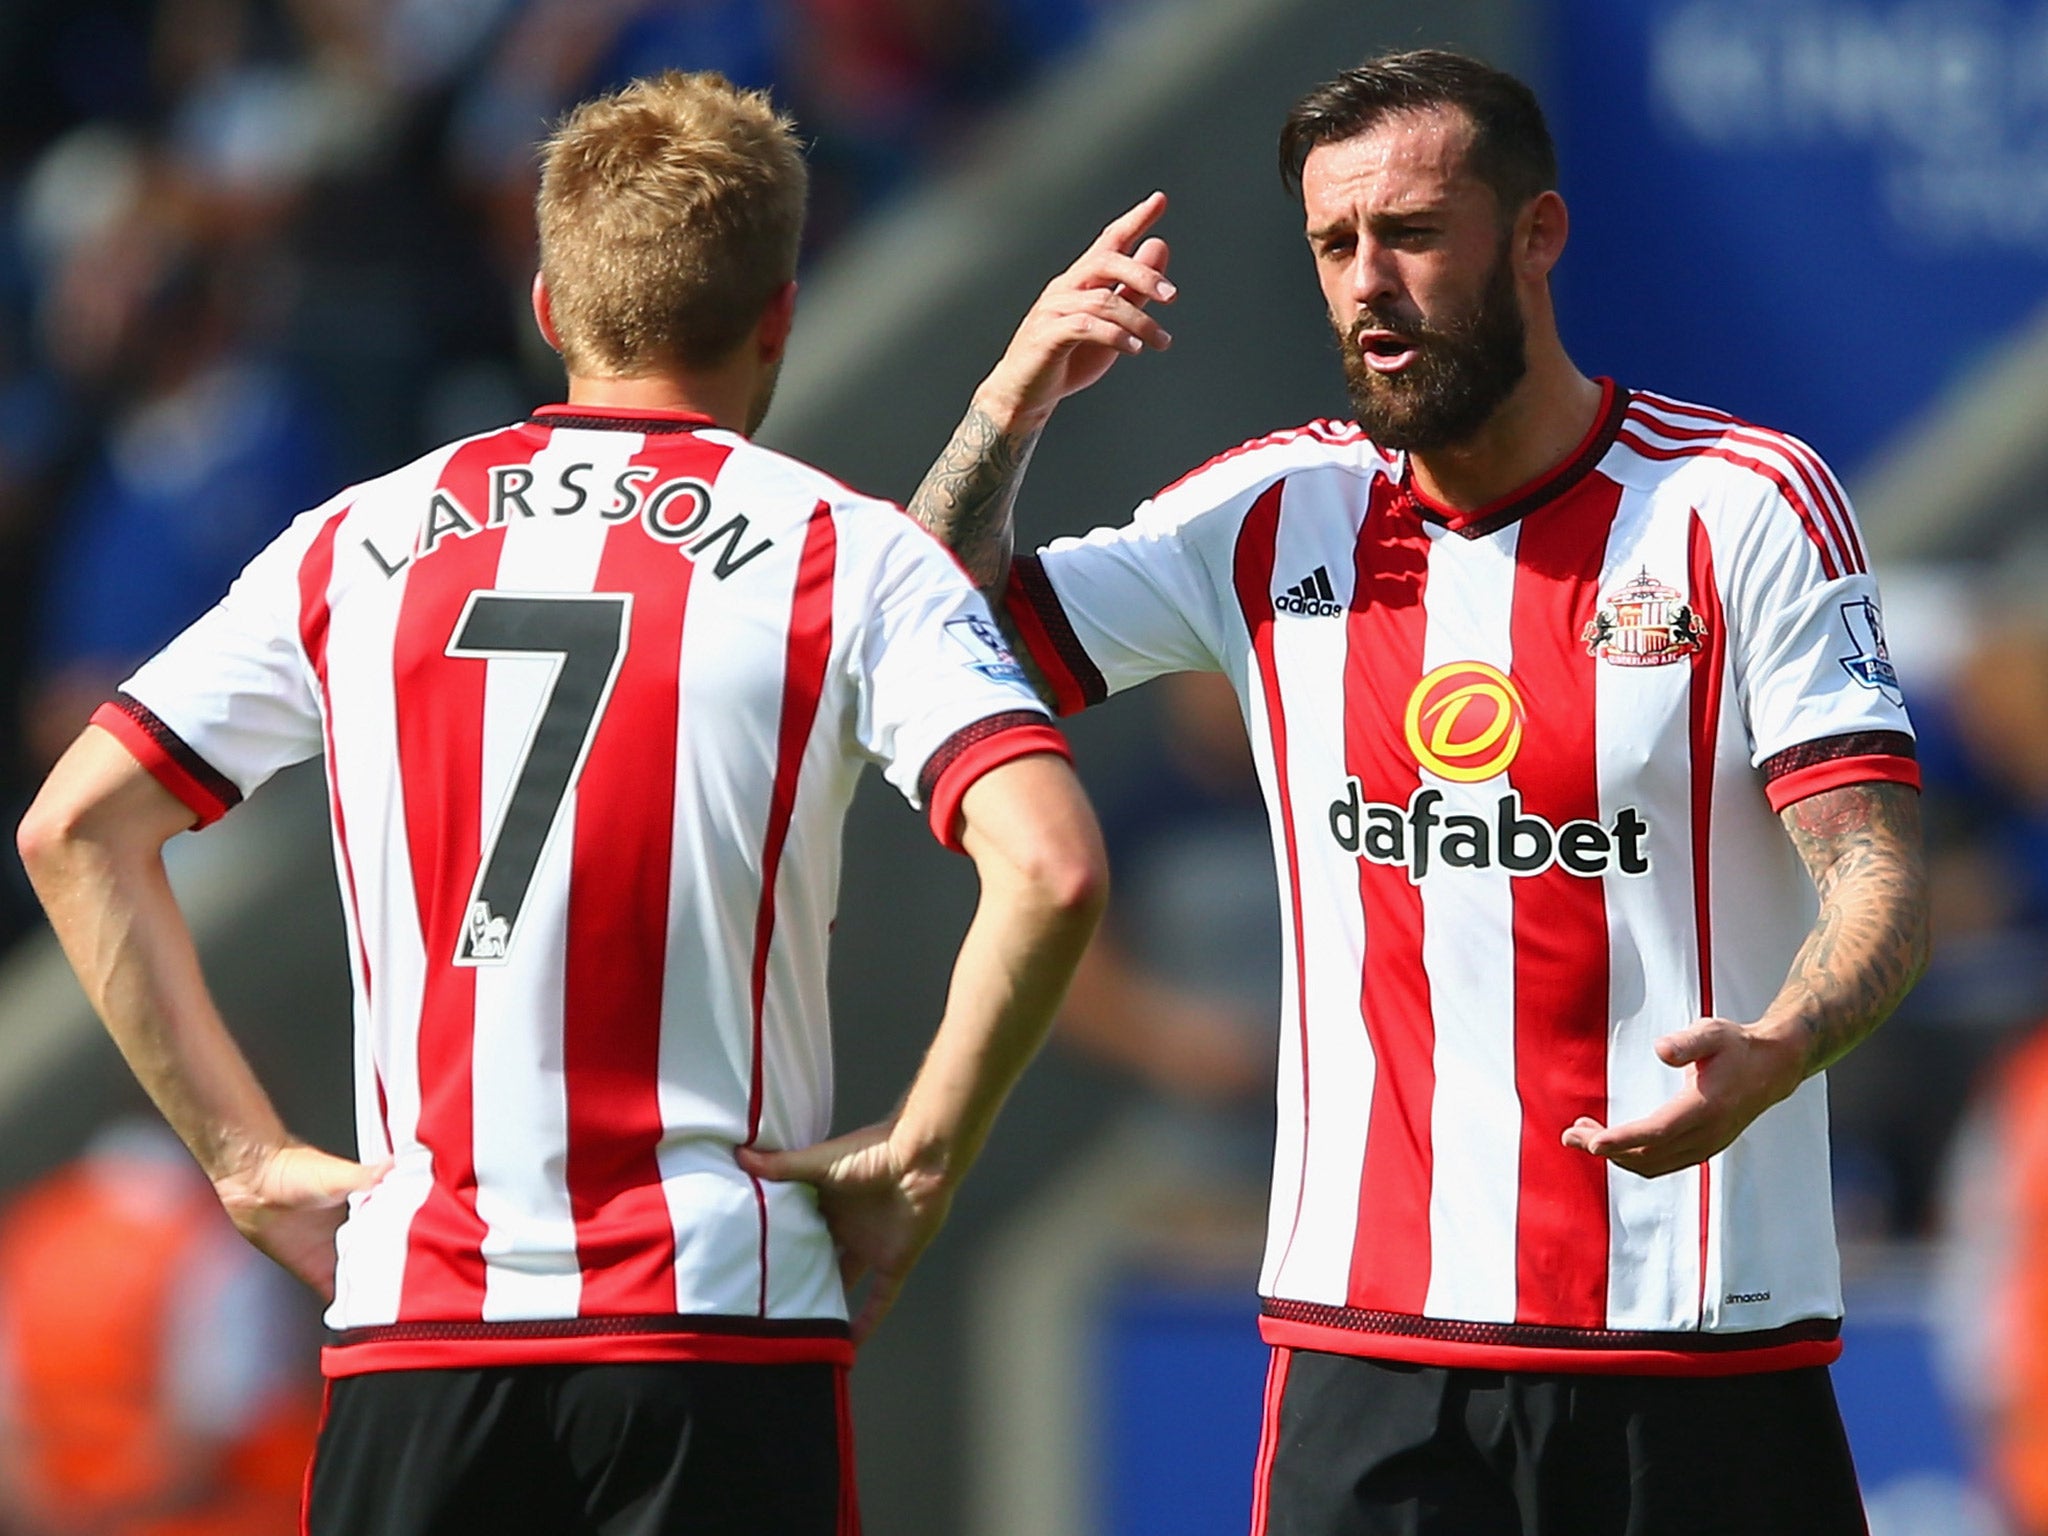 Sunderland have conceded seven goals in their opening two fixtures